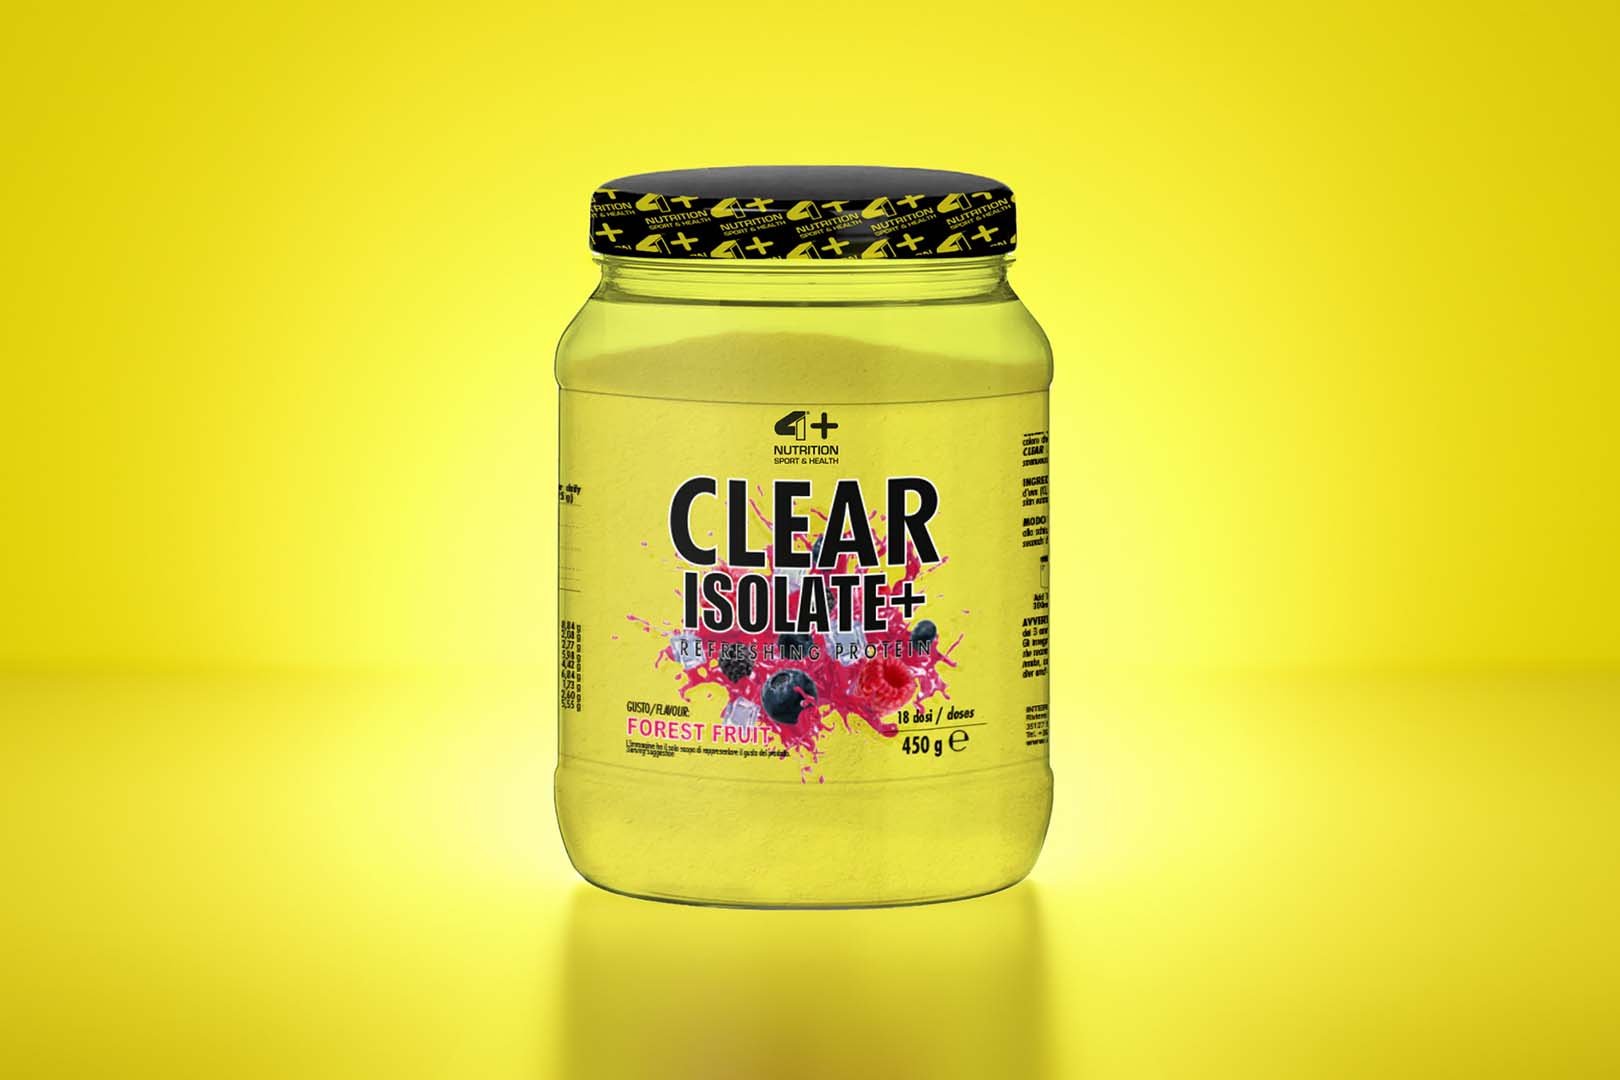 4 Plus Nutrition More Flavors Of Clear Isolate